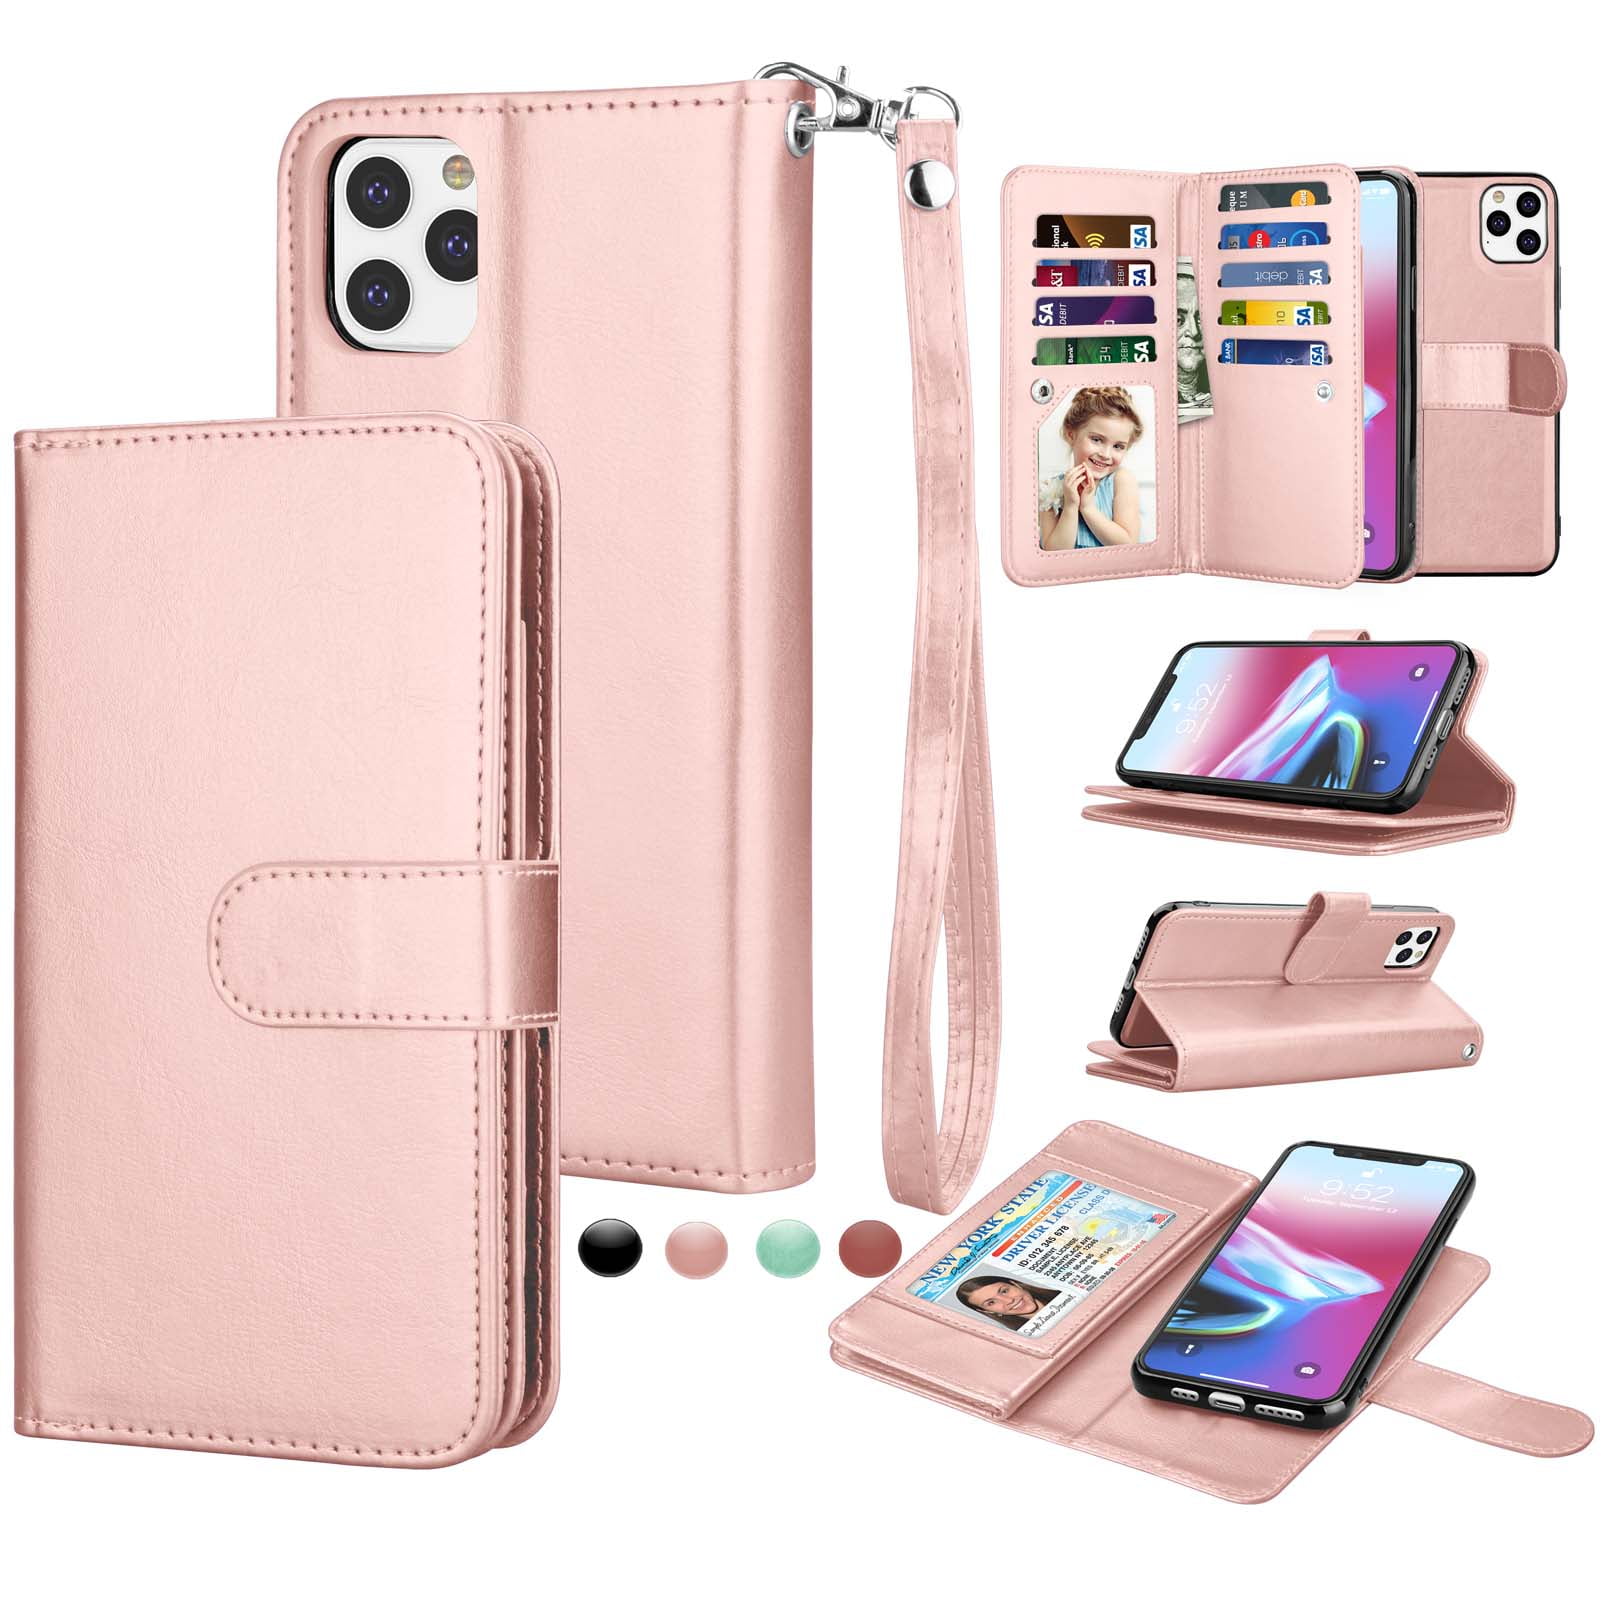 flower2 PU Leather Wallet Flip Case for iPhone 11 Pro Positive Cover Compatible with iPhone 11 Pro 